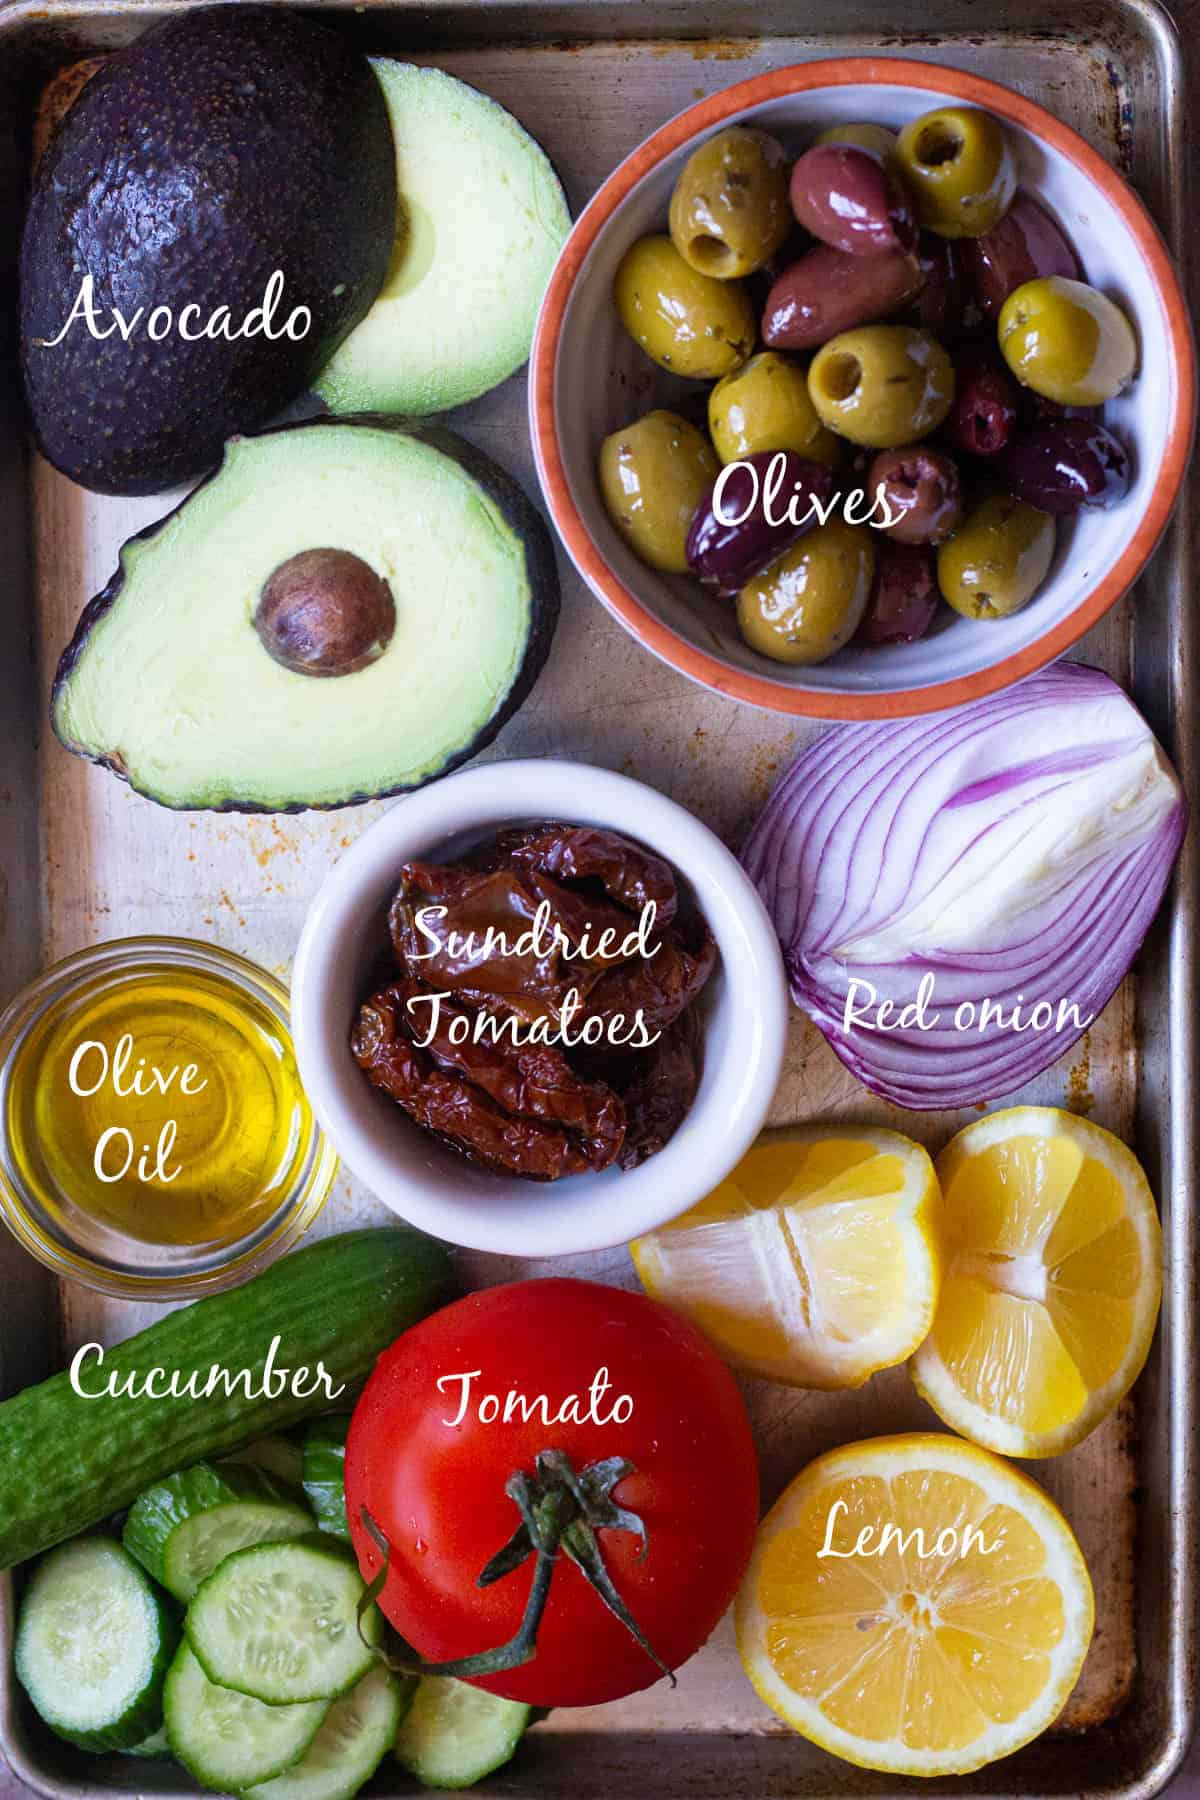 to make avocado salad you need avocado, olives, olive oil, tomatoes, cucumbers, sun dried tomatoes and onion. 